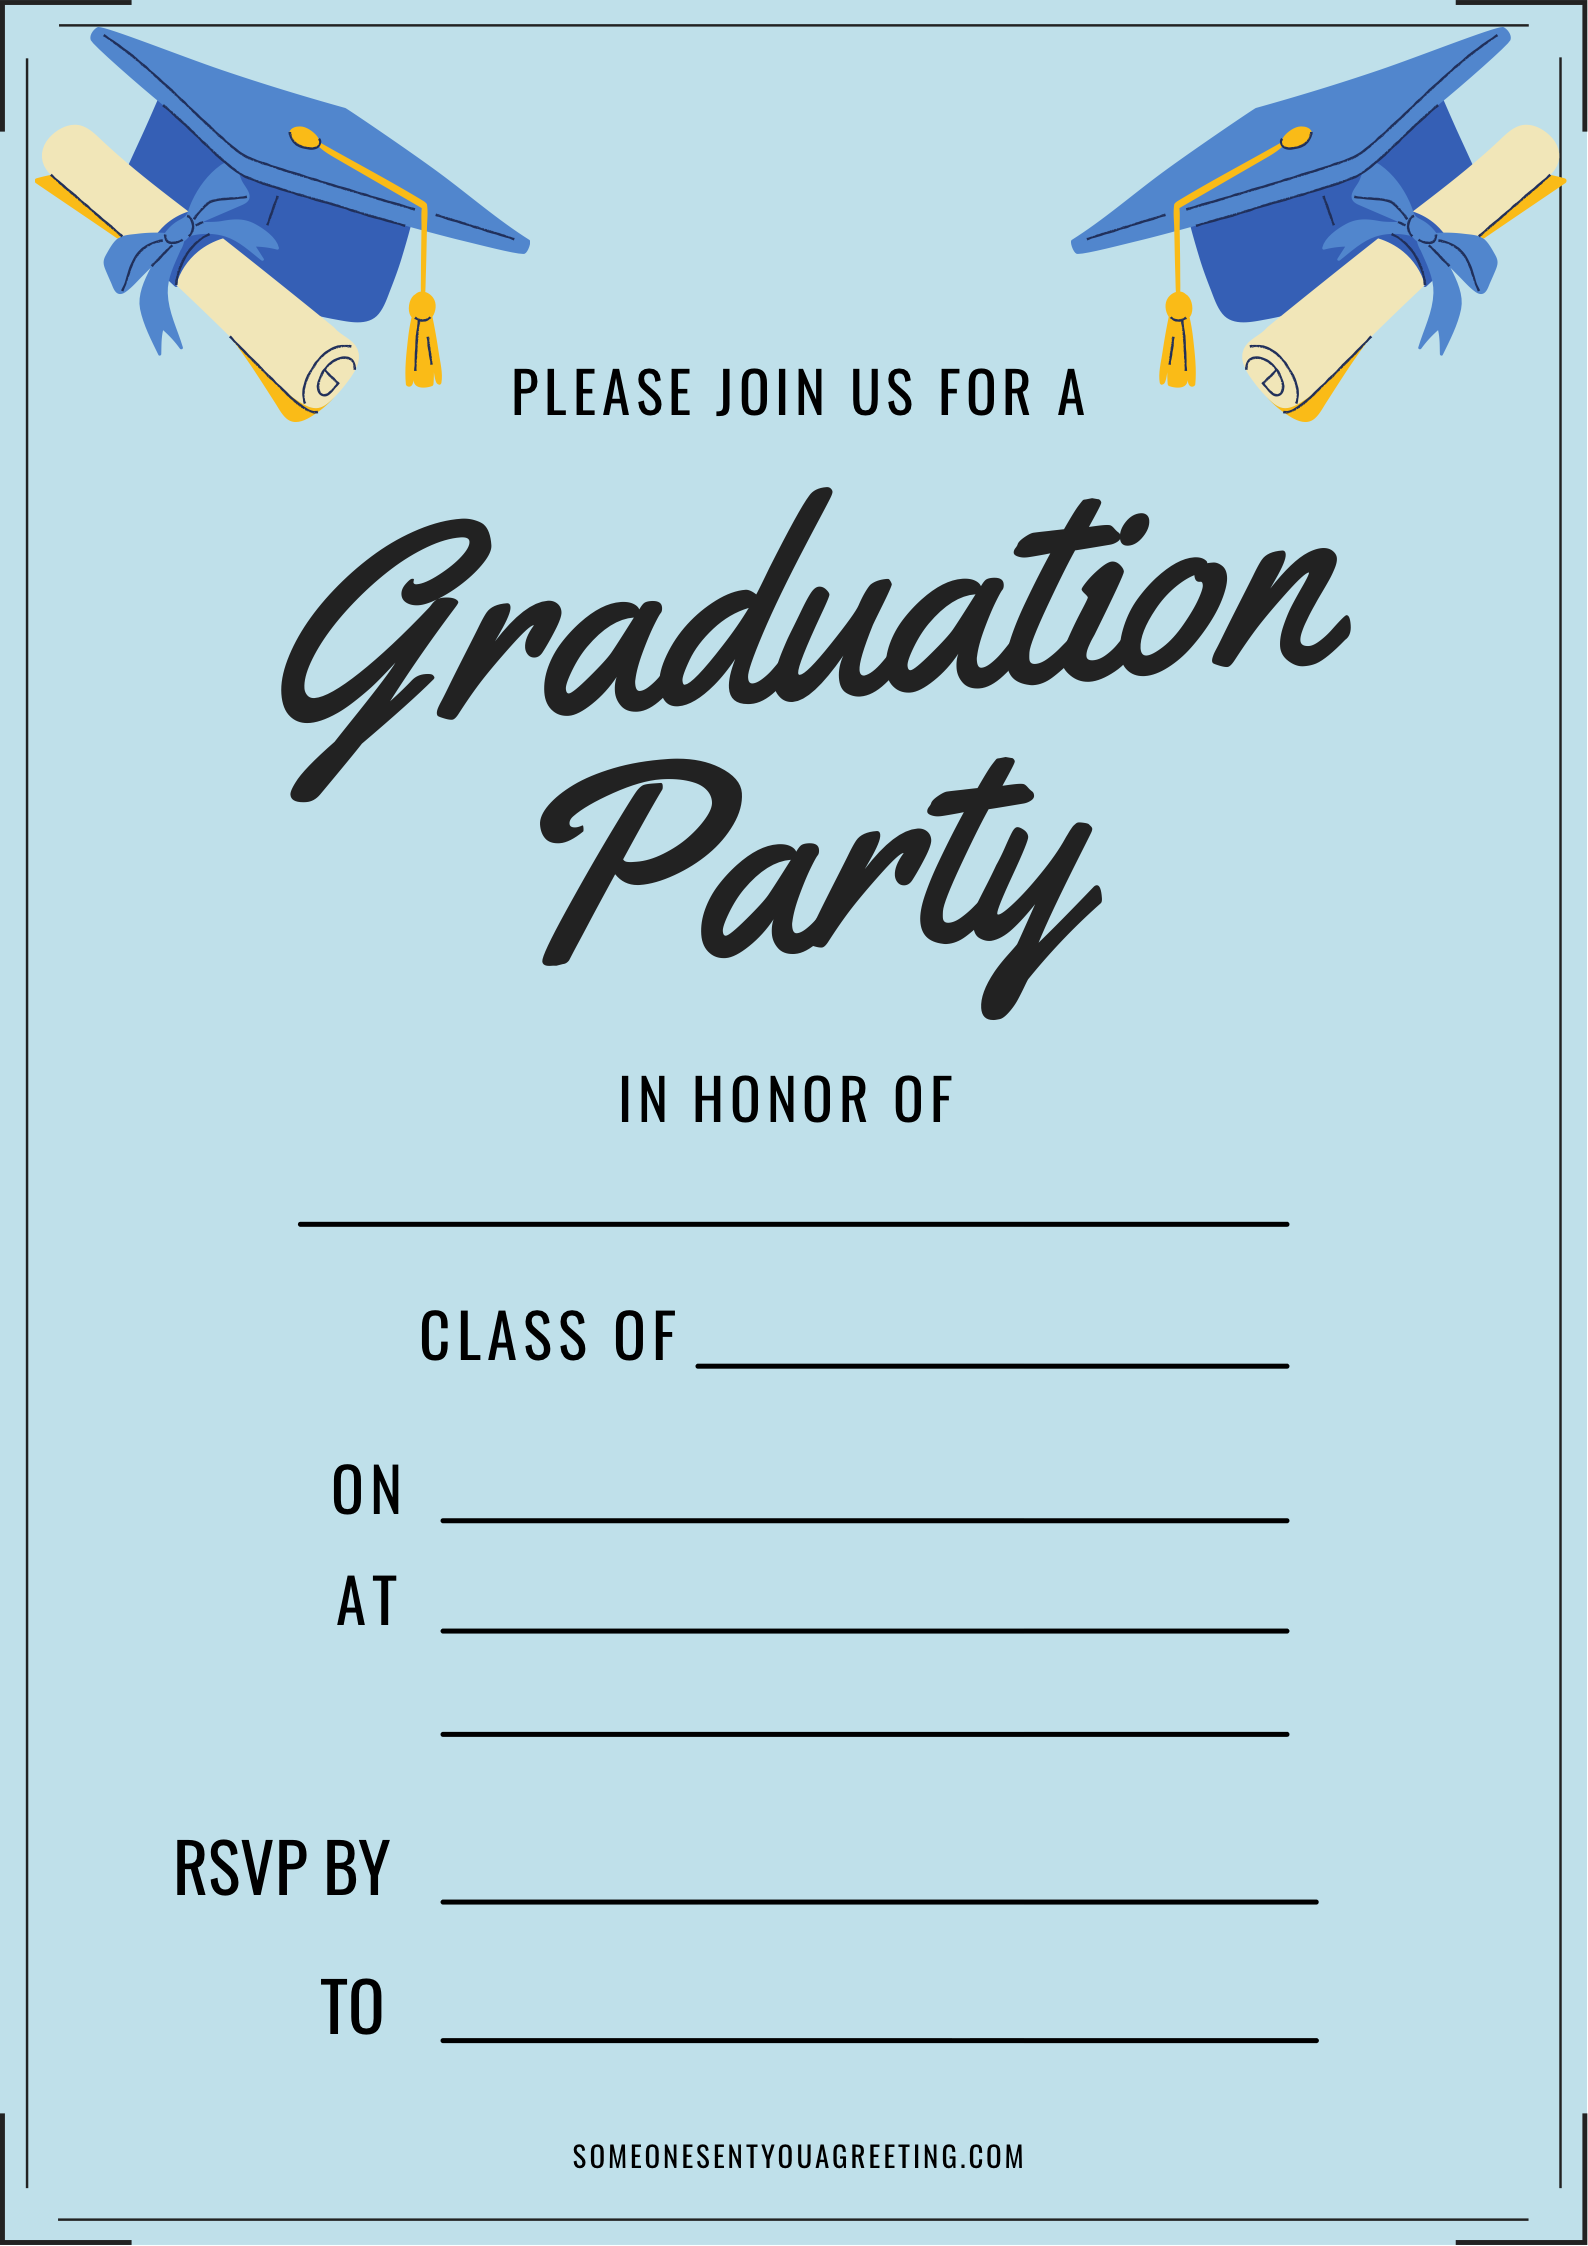 21-free-printable-graduation-party-invitations-someone-sent-you-a